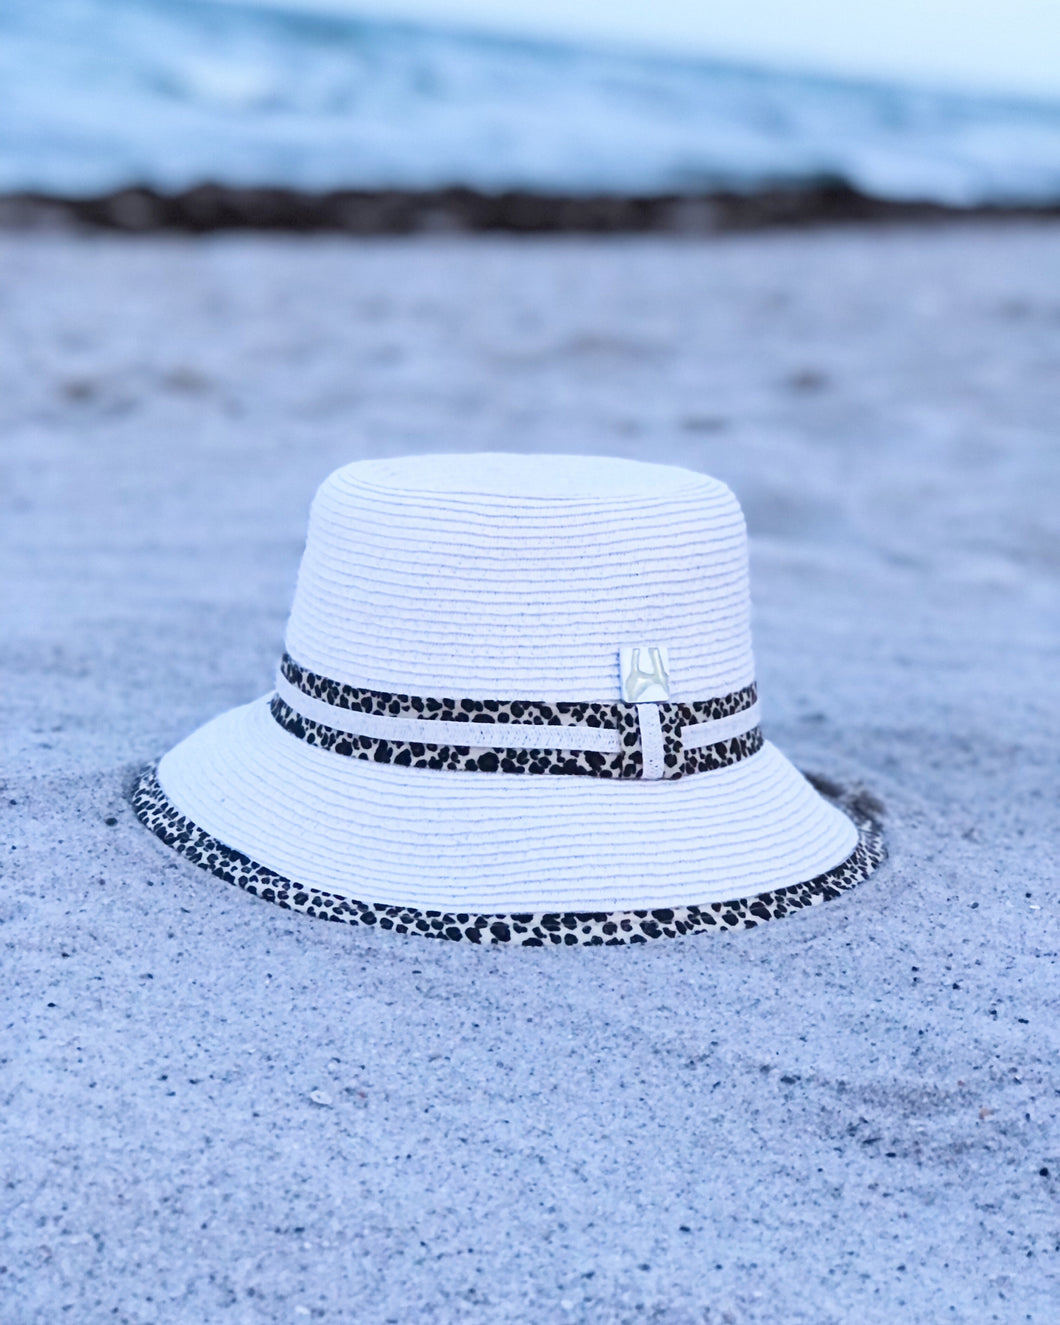 'On the prowl’ Bucket Hat